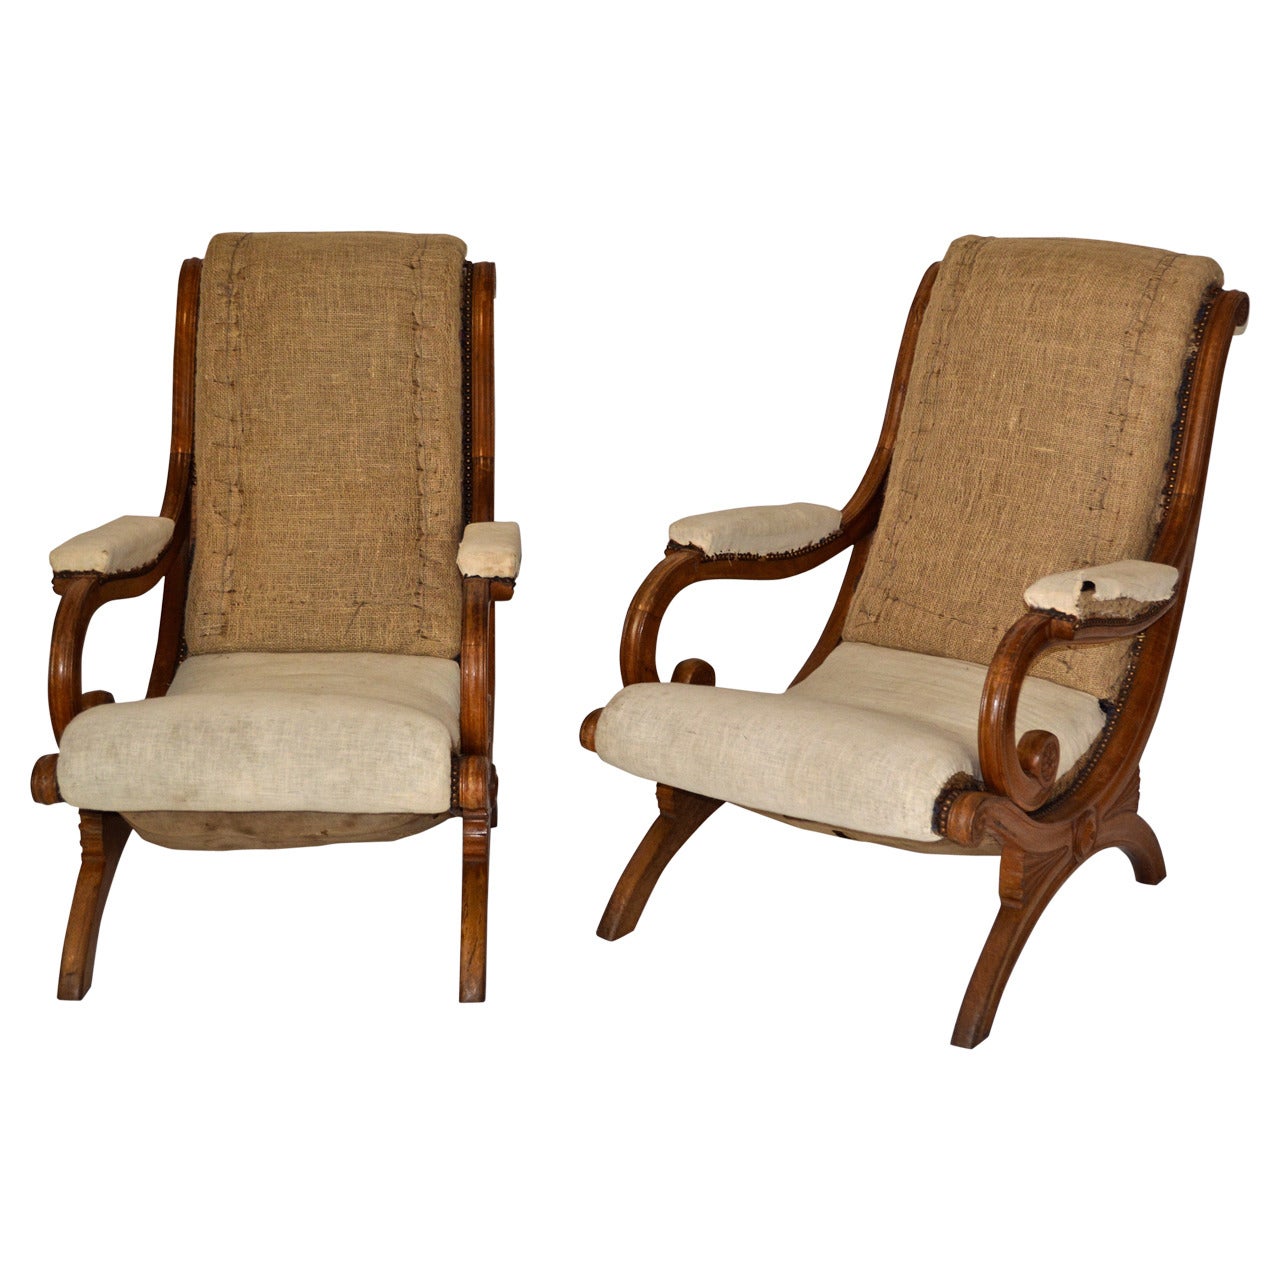 Pair of 19th Century Campeche Chairs